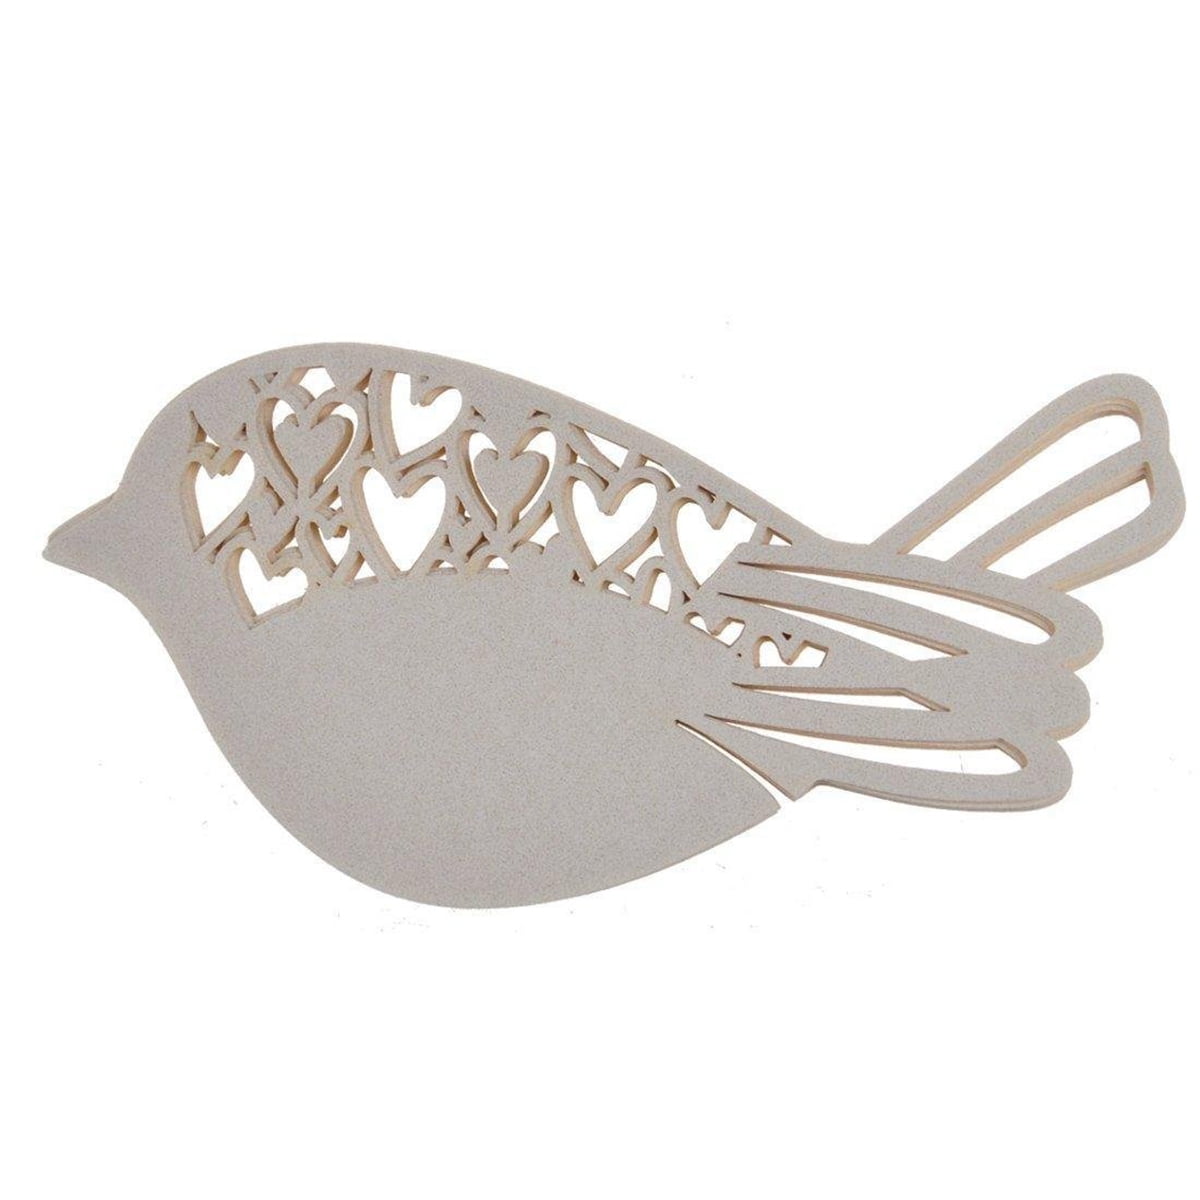 Ivory Bird Shaped Laser Cut Table Name Place Cards Wedding Party Favor Decor 